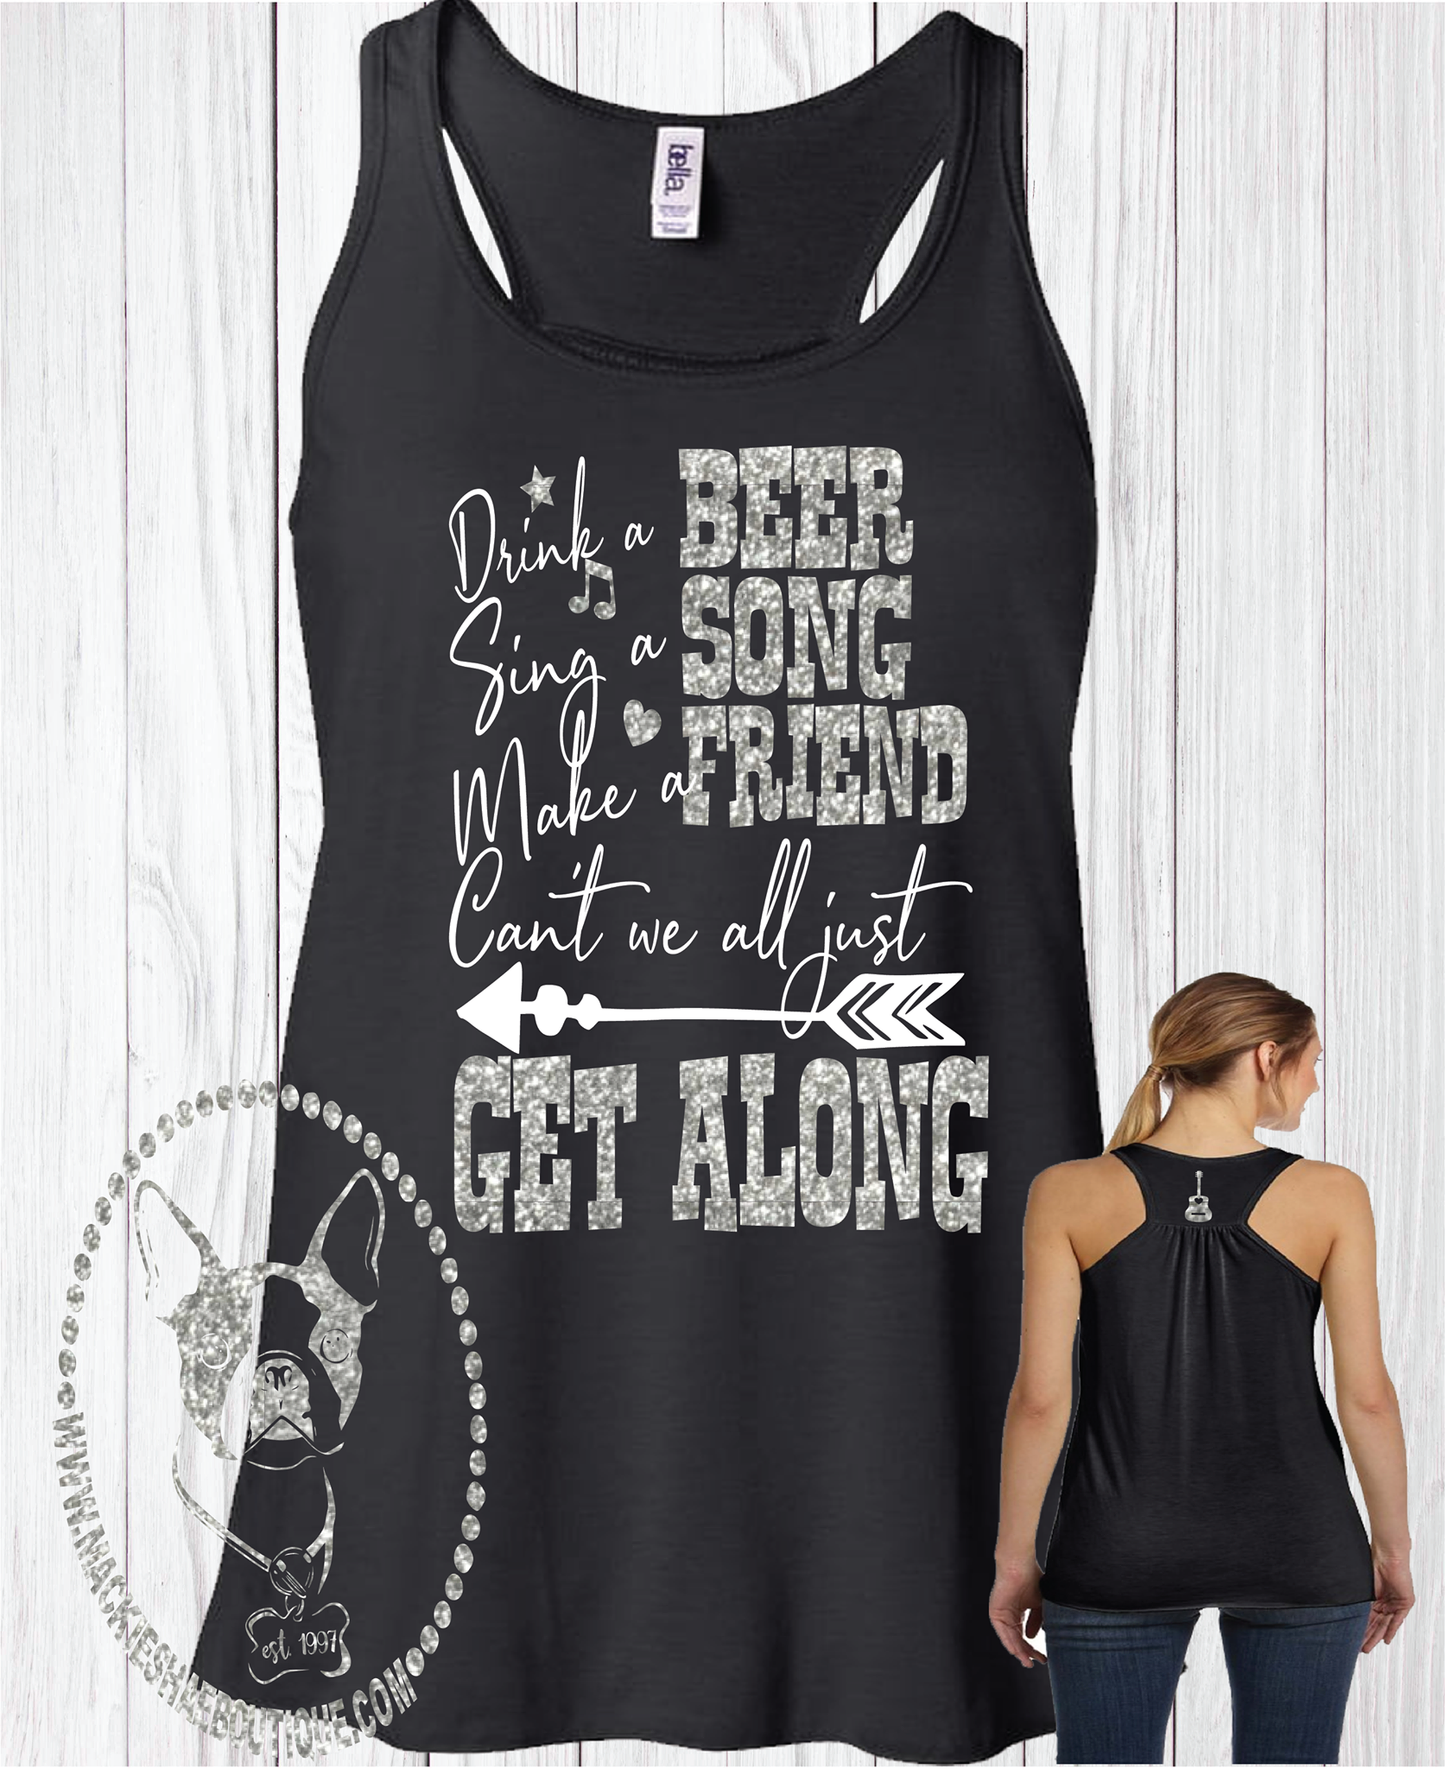 Drink A Beer, Sing A Song, Make A Friend, Can't We All Just Get Along Custom Shirt, Racerback Tank